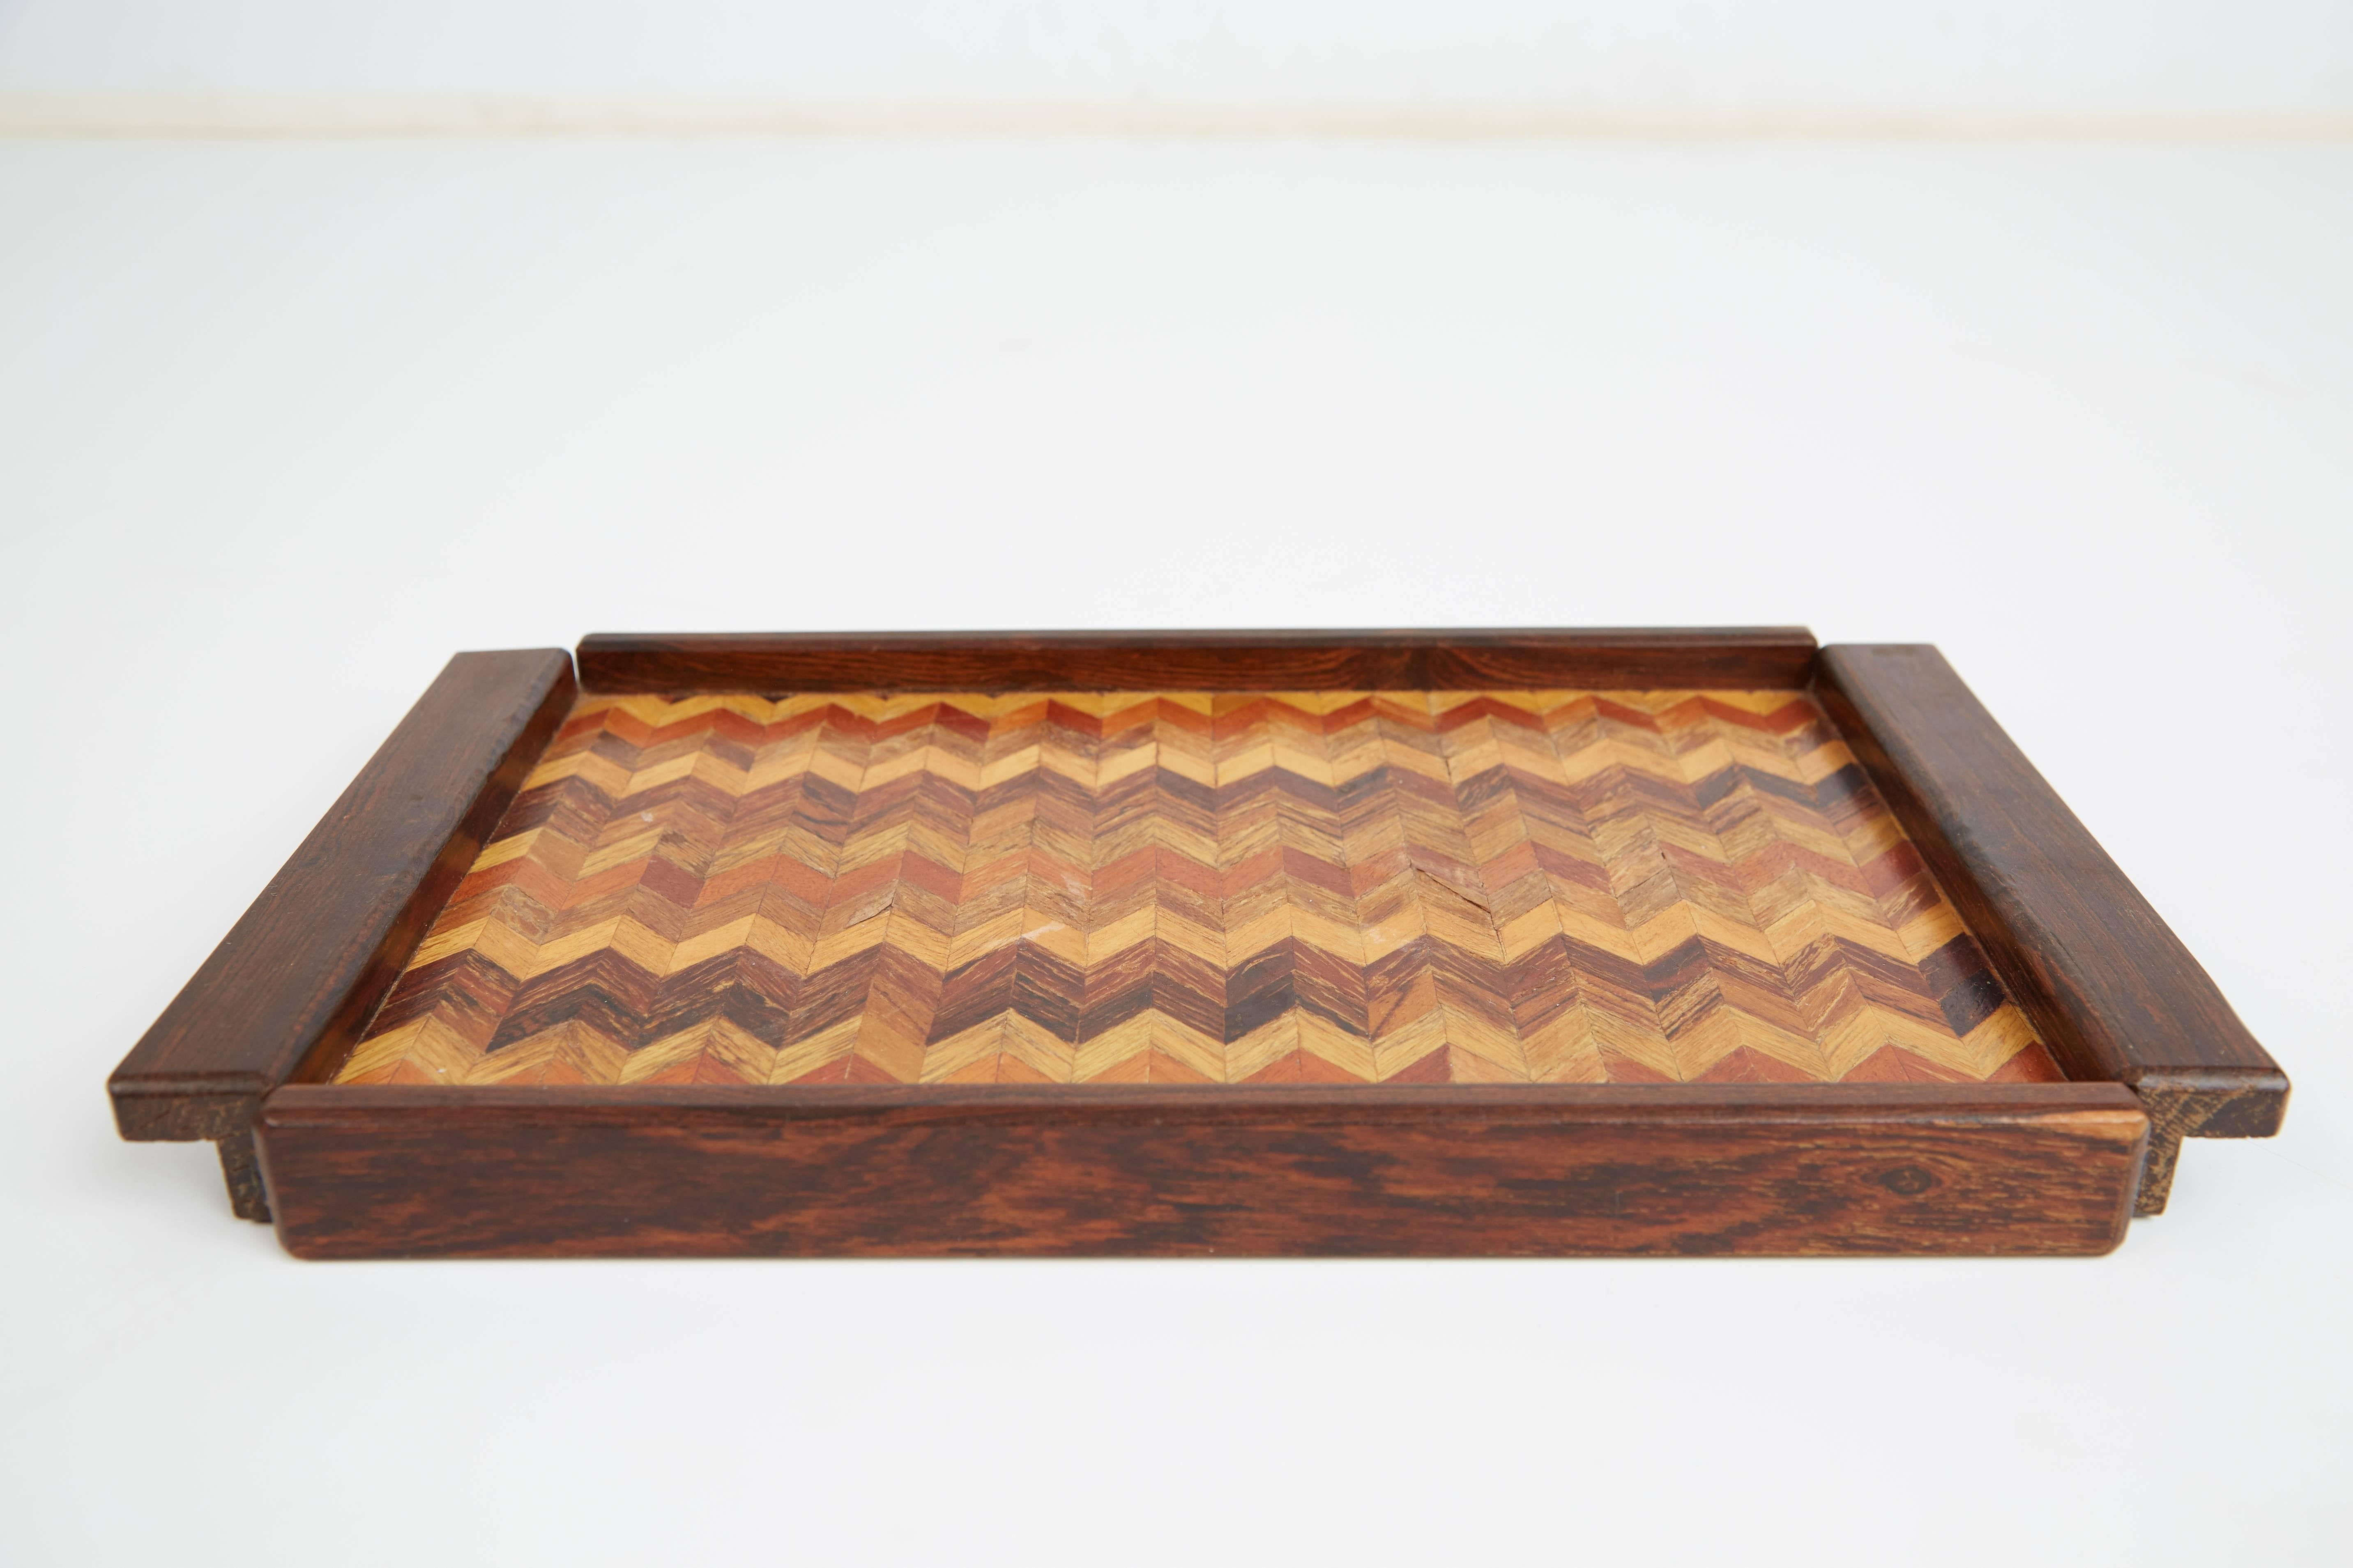 Exquisitely crafted rectangular shaped trays designed by Don Shoemaker for Señal of Mexico. Taking advantage of the expertise provided by Mexican artisans, Shoemaker founded Señal which produced utilitarian objects, such as these stunning